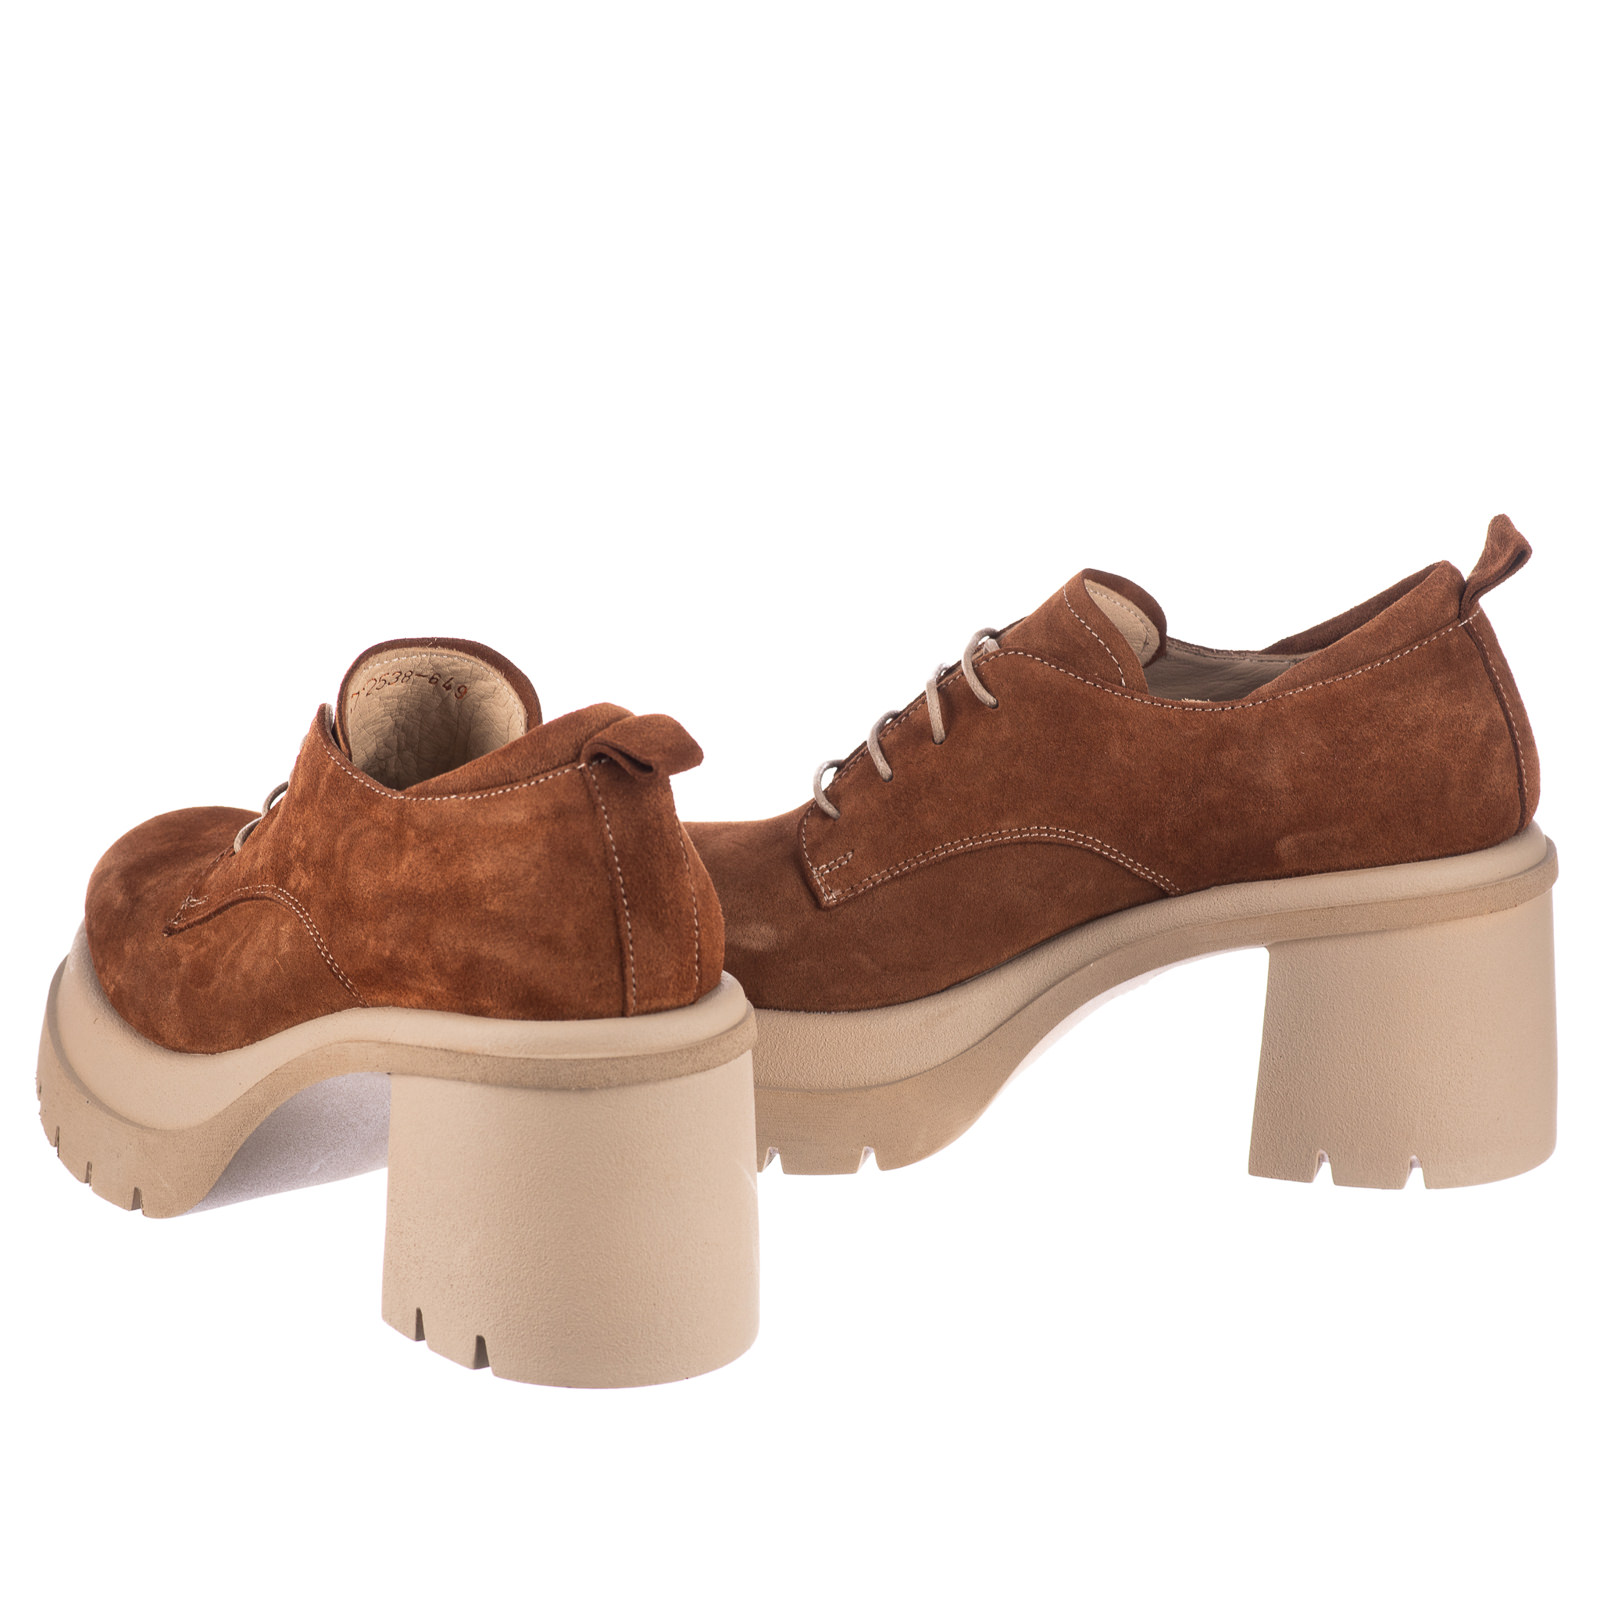 Leather shoes & flats B666 - BROWN